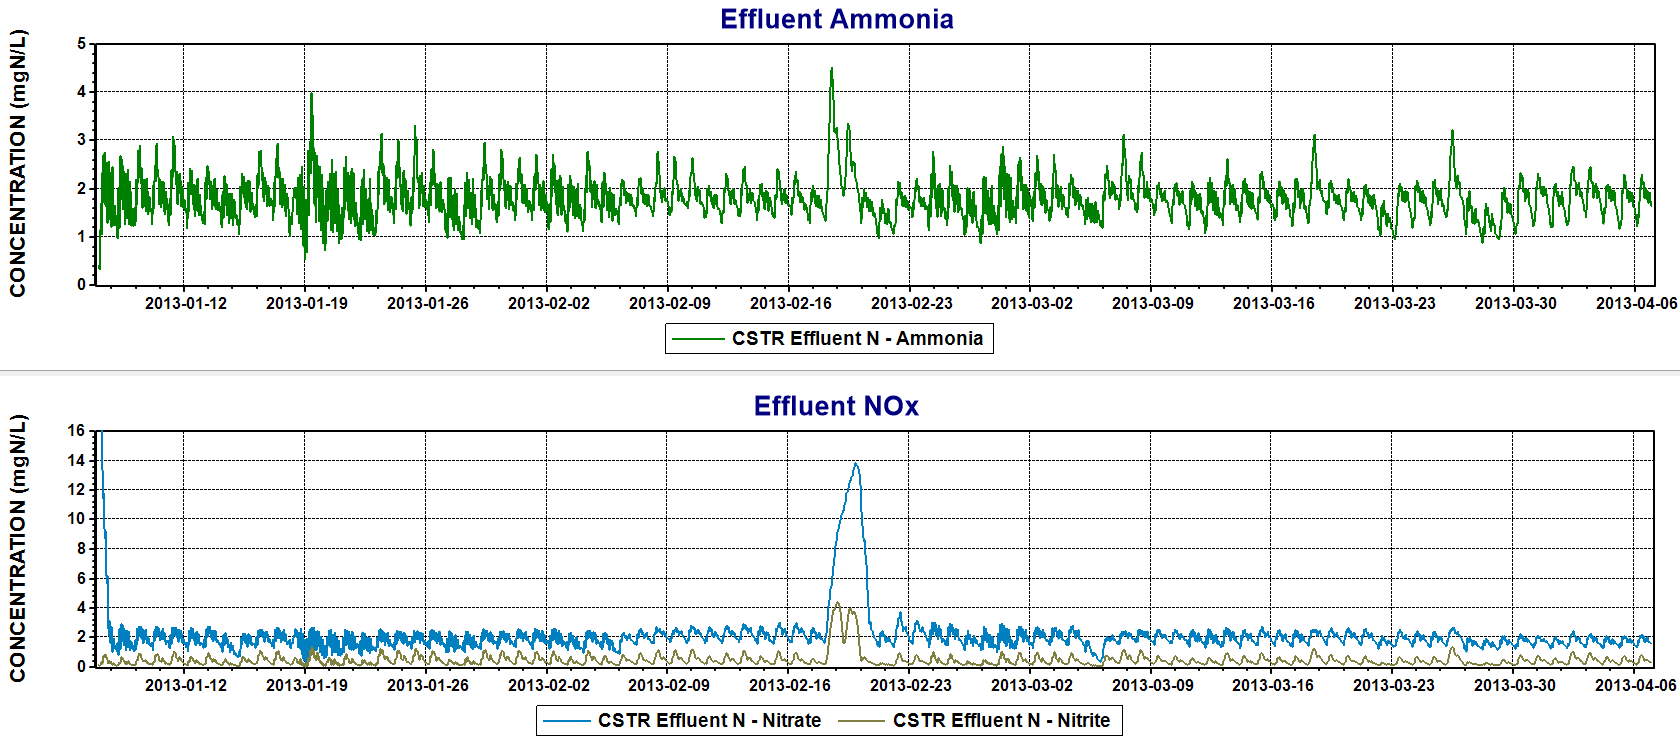 Figure 31: Effluent Ammonia and NOx concentrations over 90-day dynamic simulation with time-based ammonia control.